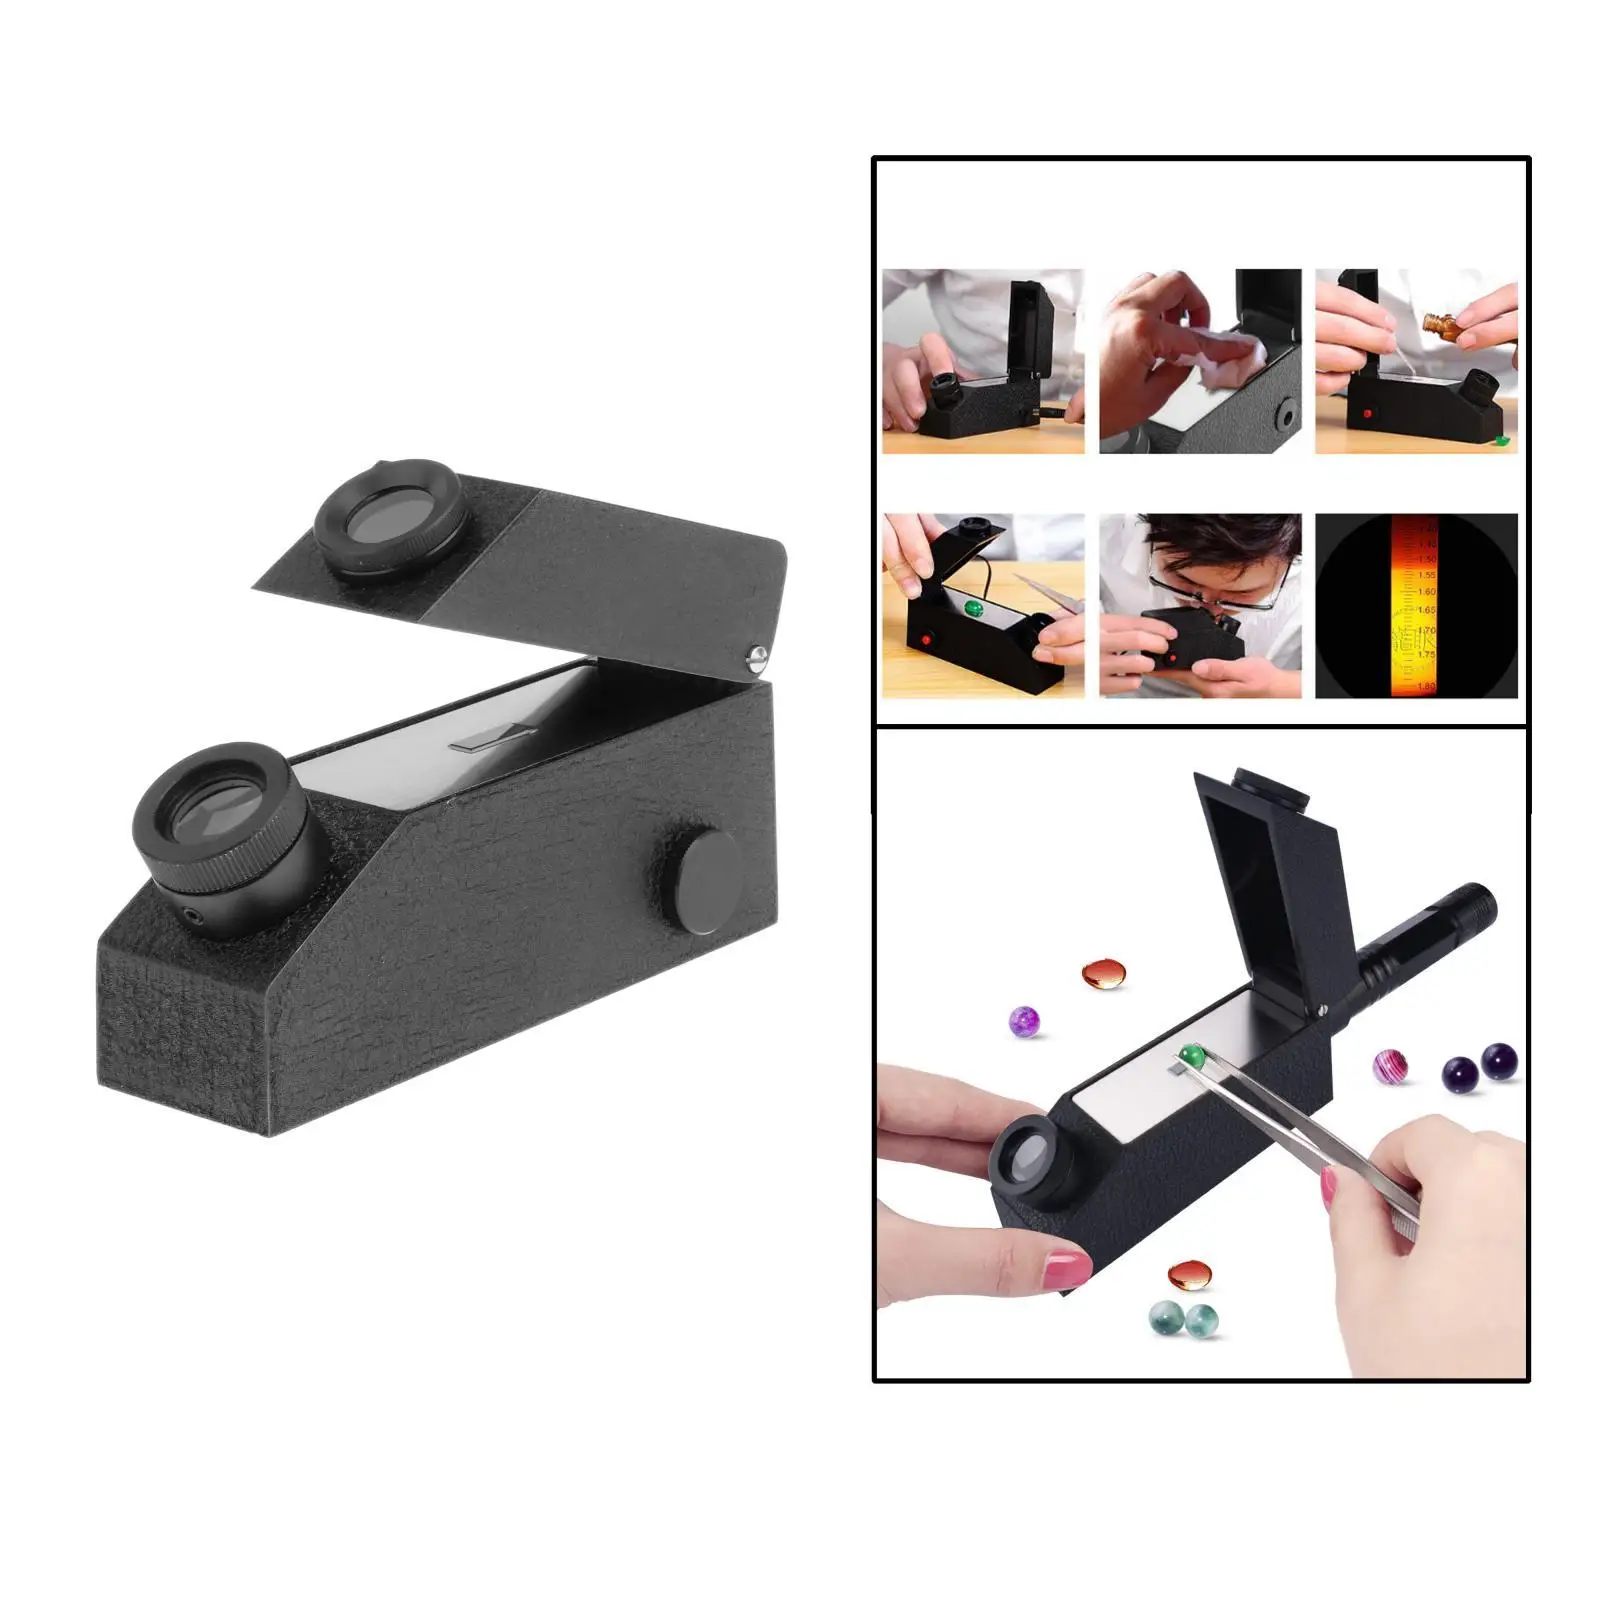 Portable Gemstone ldentification Jewelry Refractometer 1.30-1.81 RI, Compact, Easy to Carry